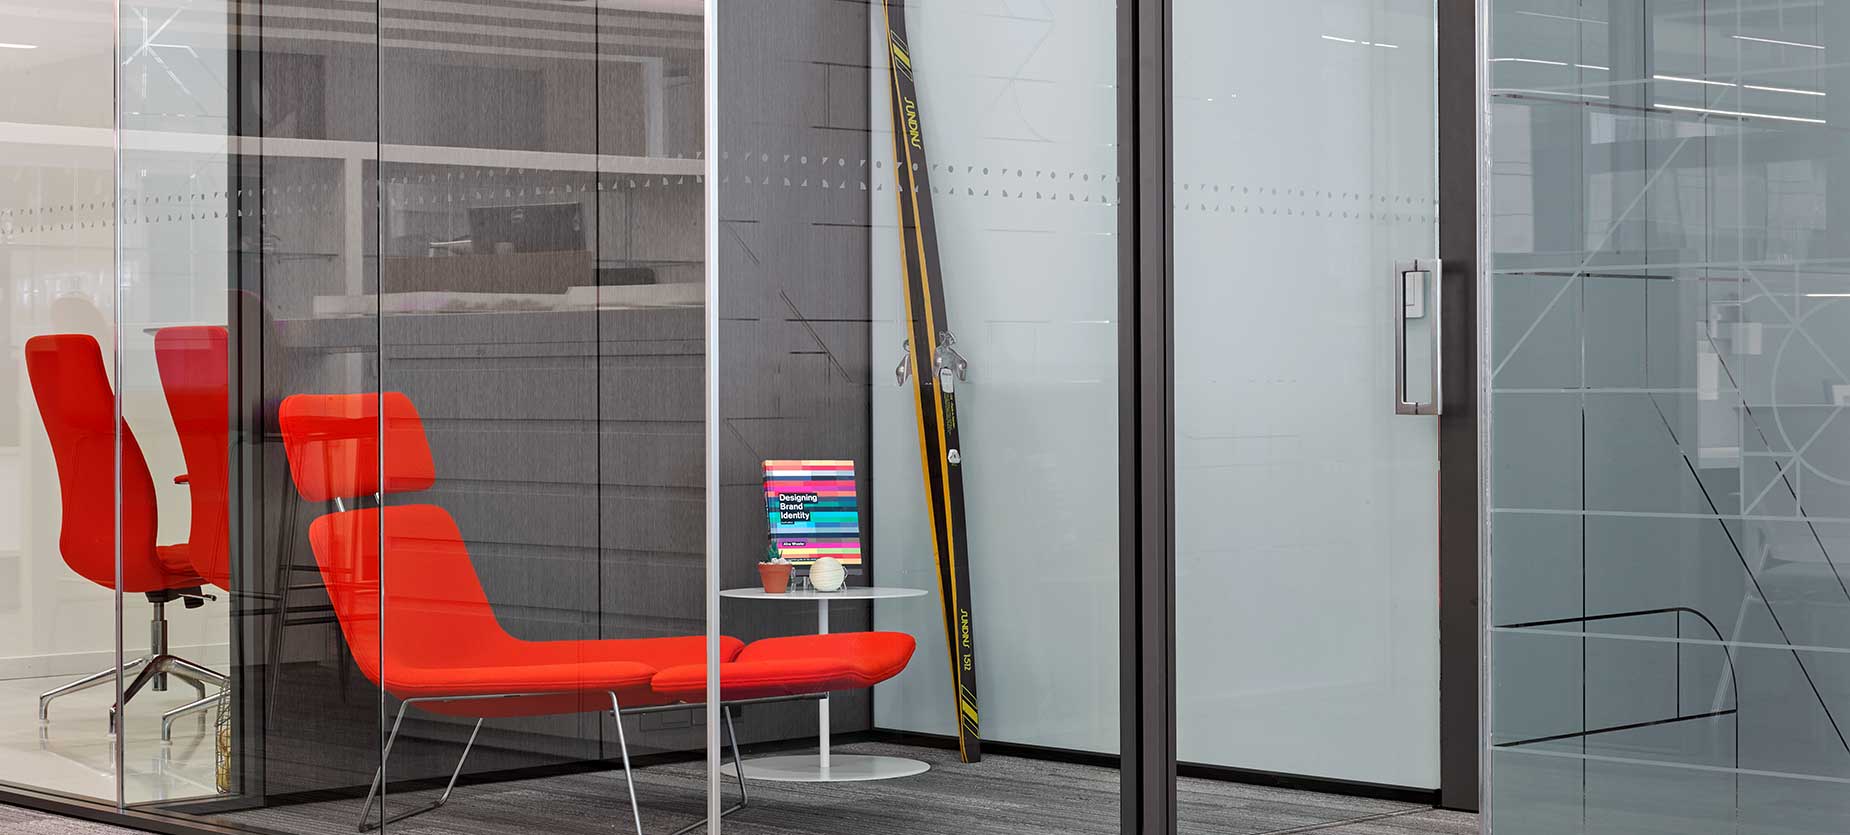 Enclose Frameless Glass creates a private touchdown space for phone calls and individual tasks.